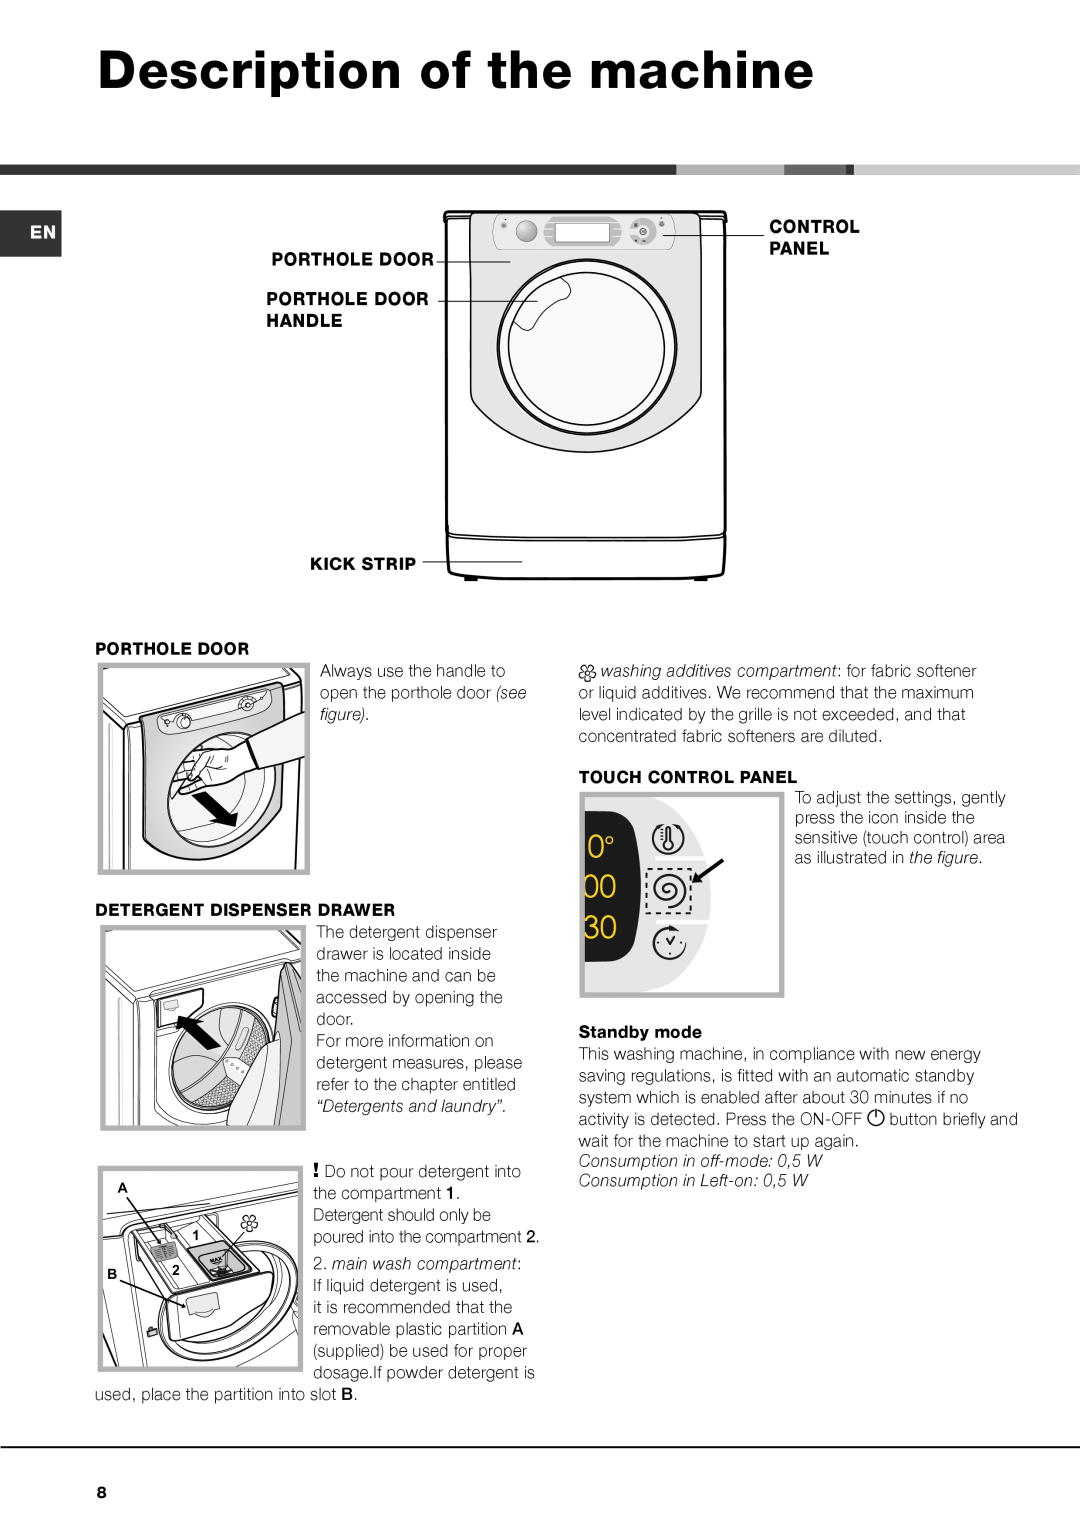 Hotpoint aq133da 697i manual Description of the machine, “Detergents and laundry”, main wash compartment 